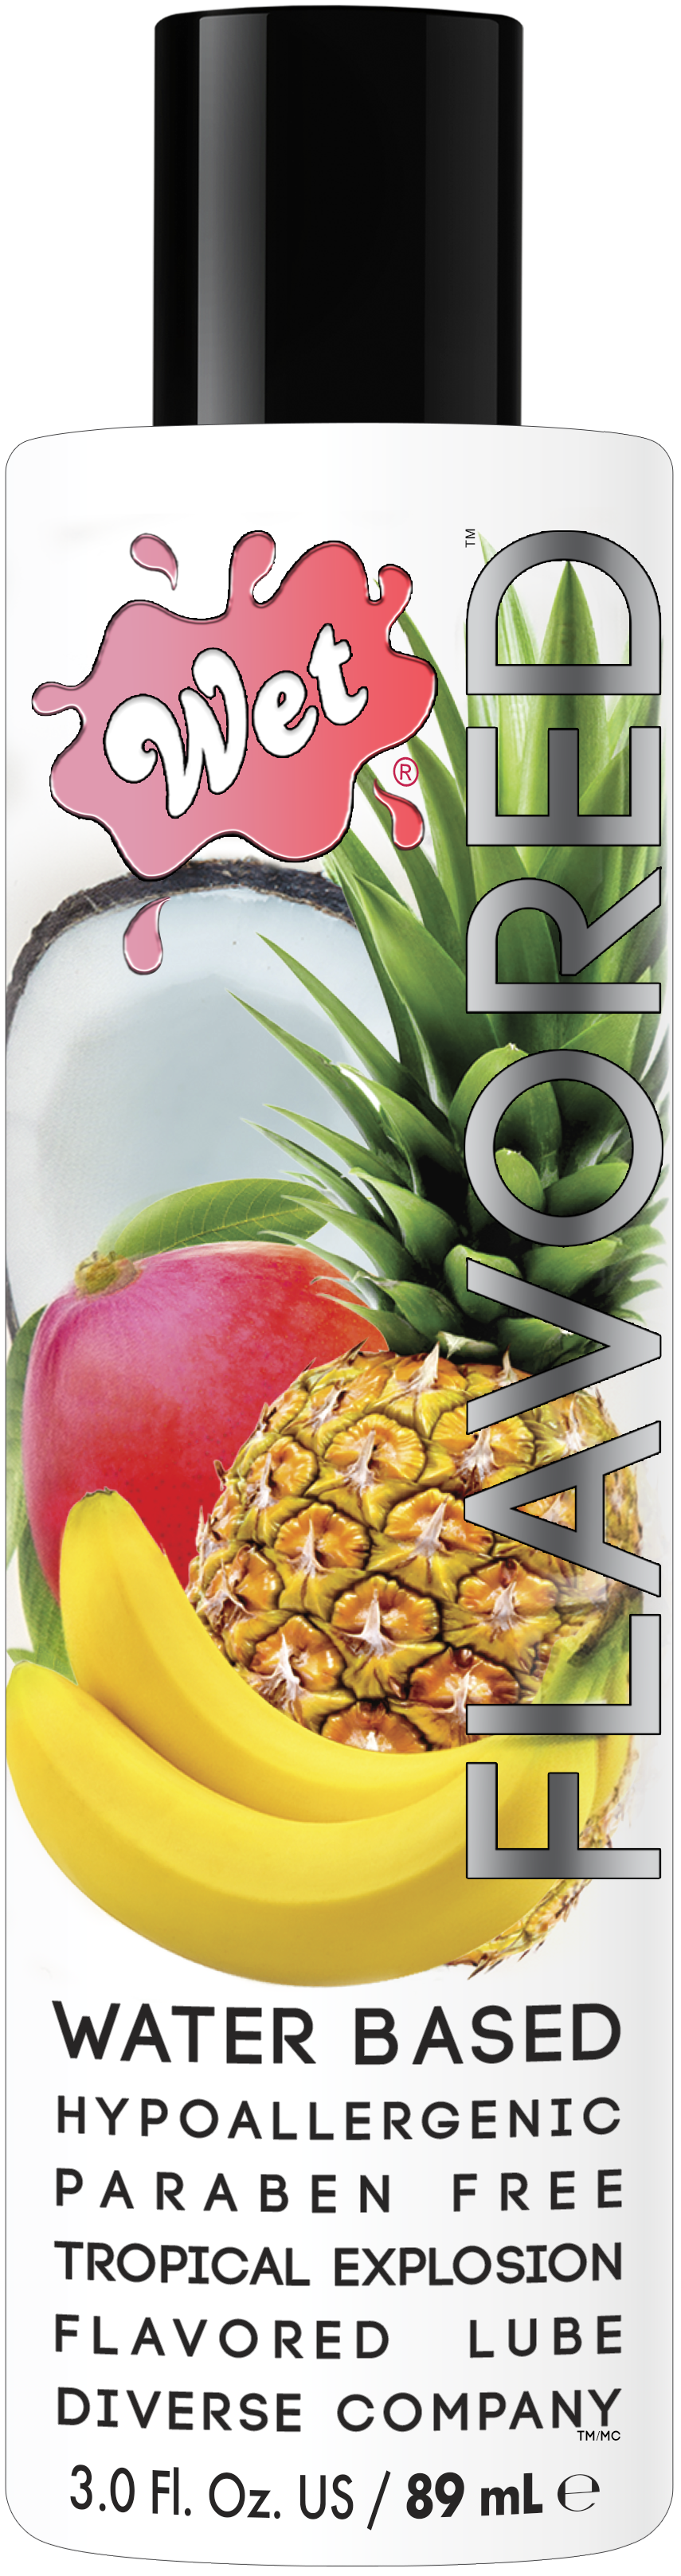 Wet® Flavored™ Tropical Explosion 3 Fl. Oz./89mL